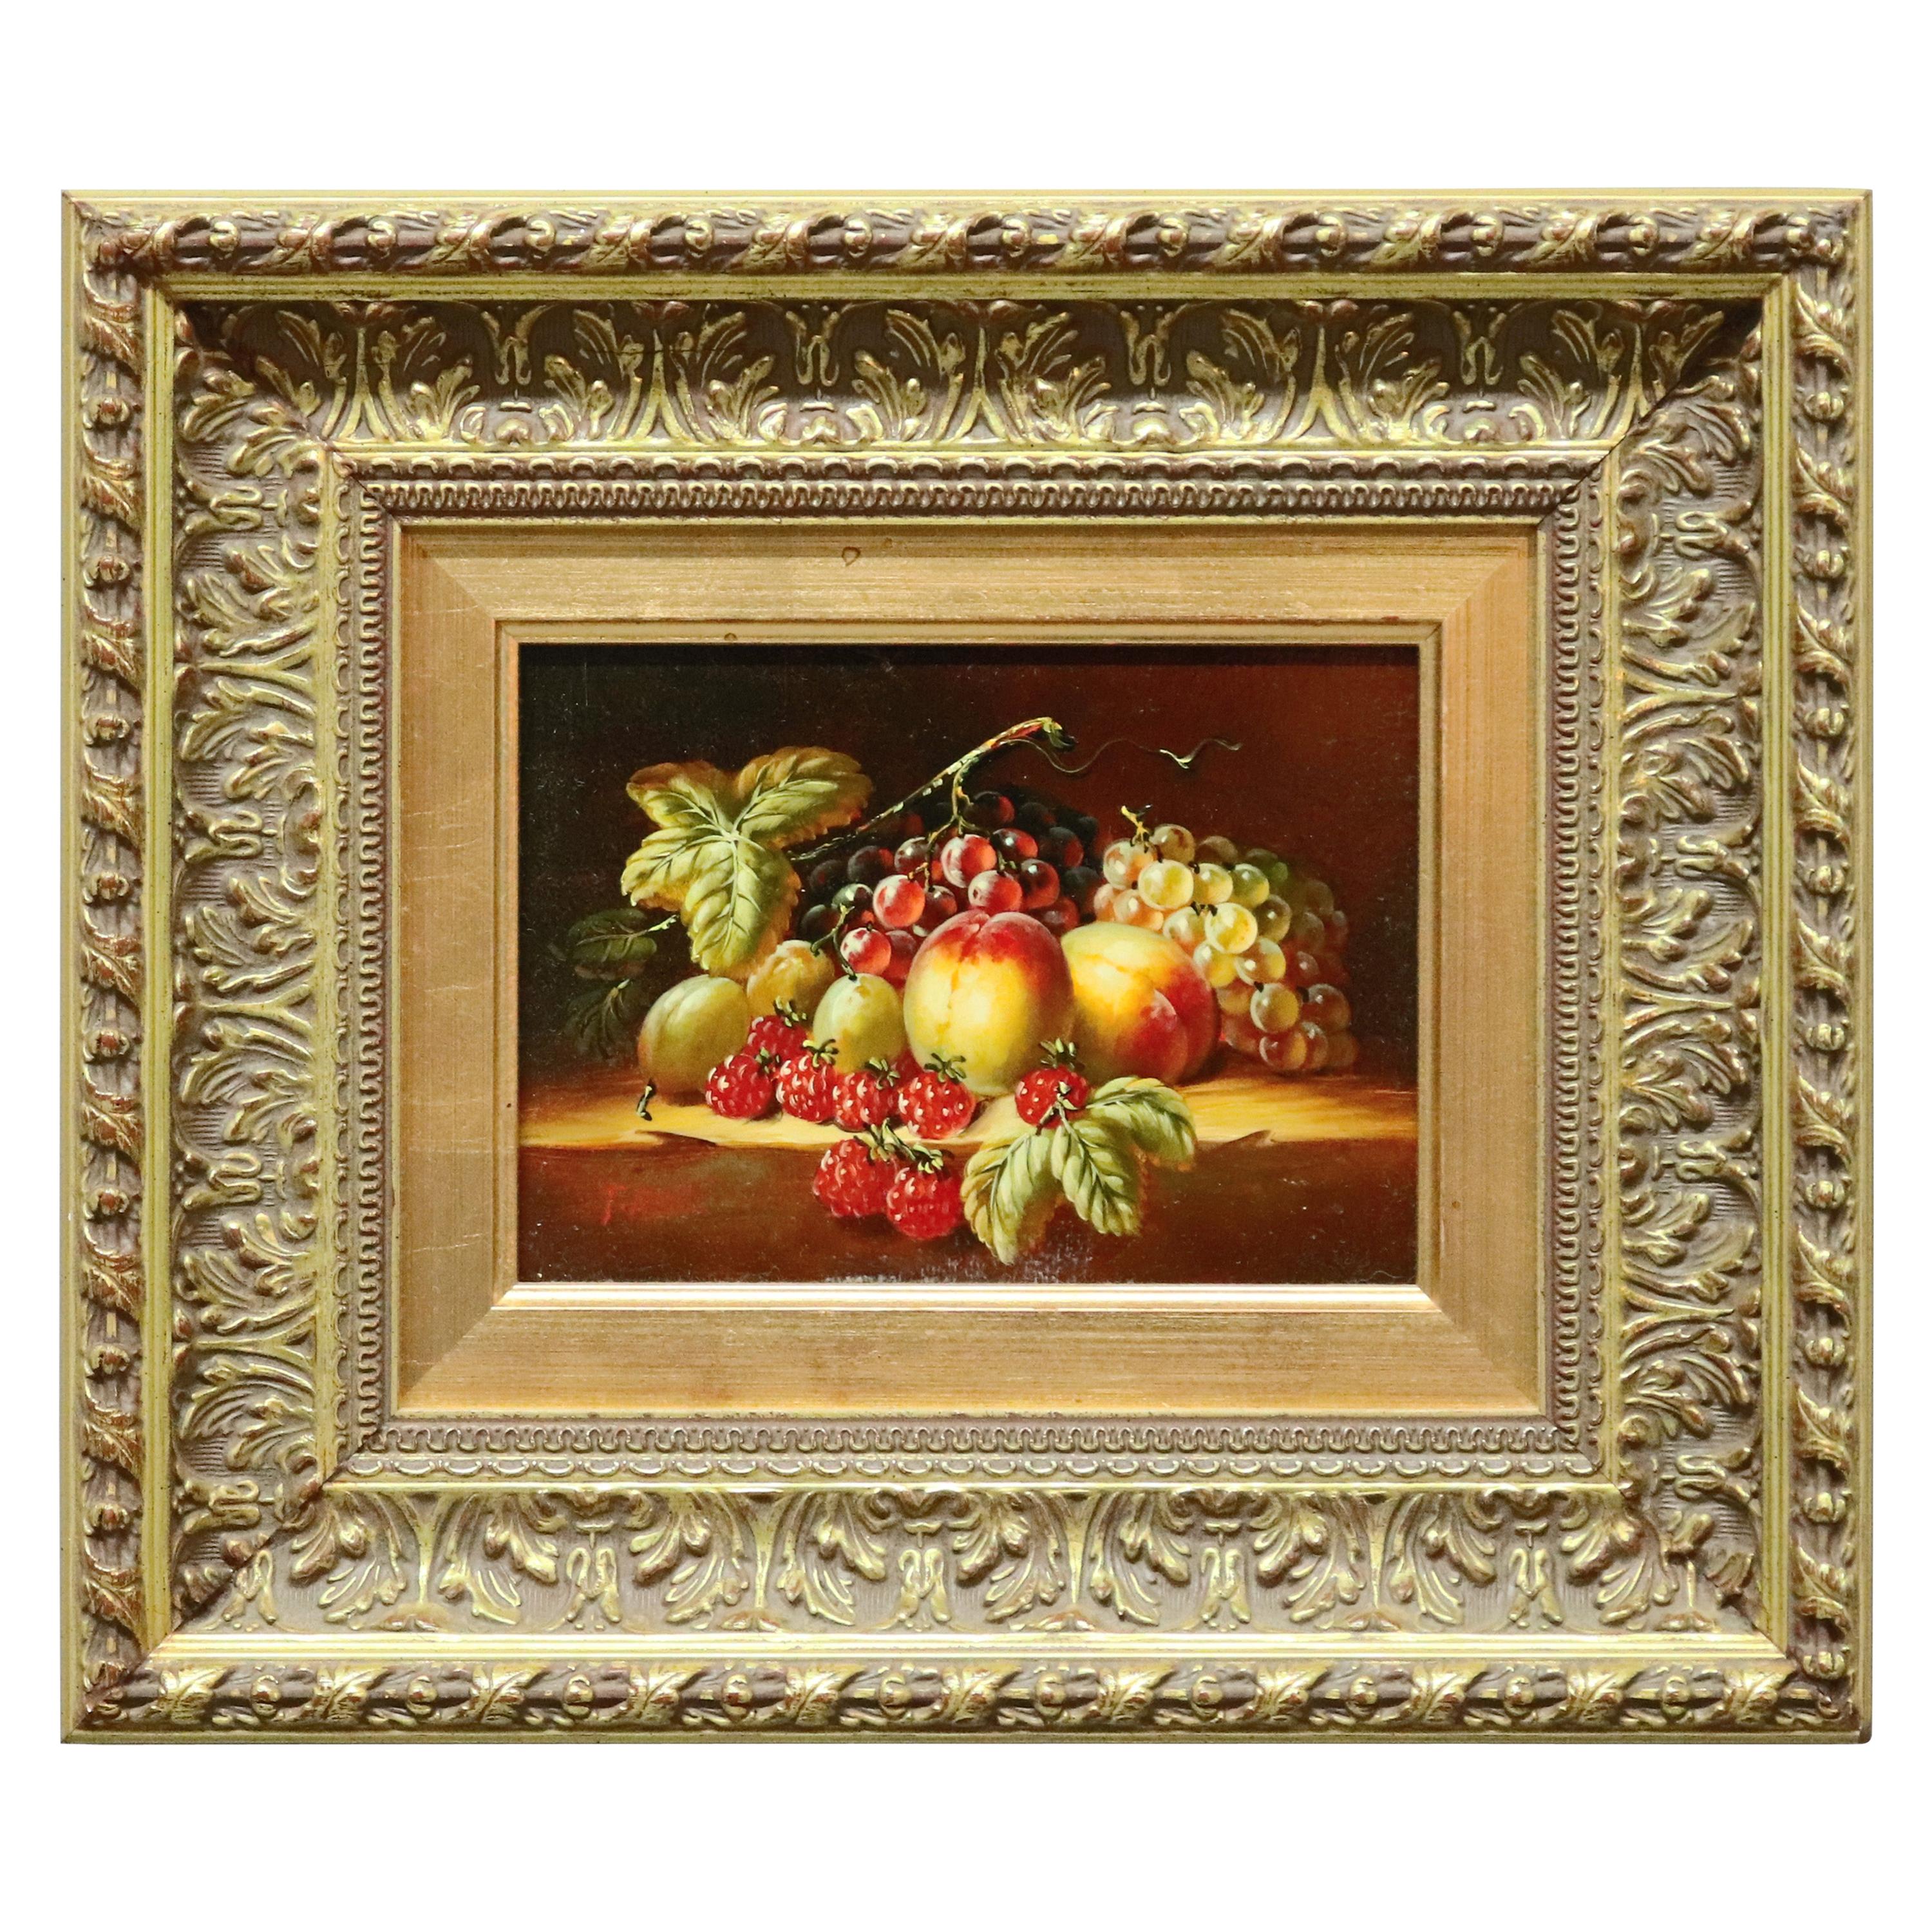 Oil on Canvas Still Life Painting of Fruit in Giltwood Frame, 20th Century